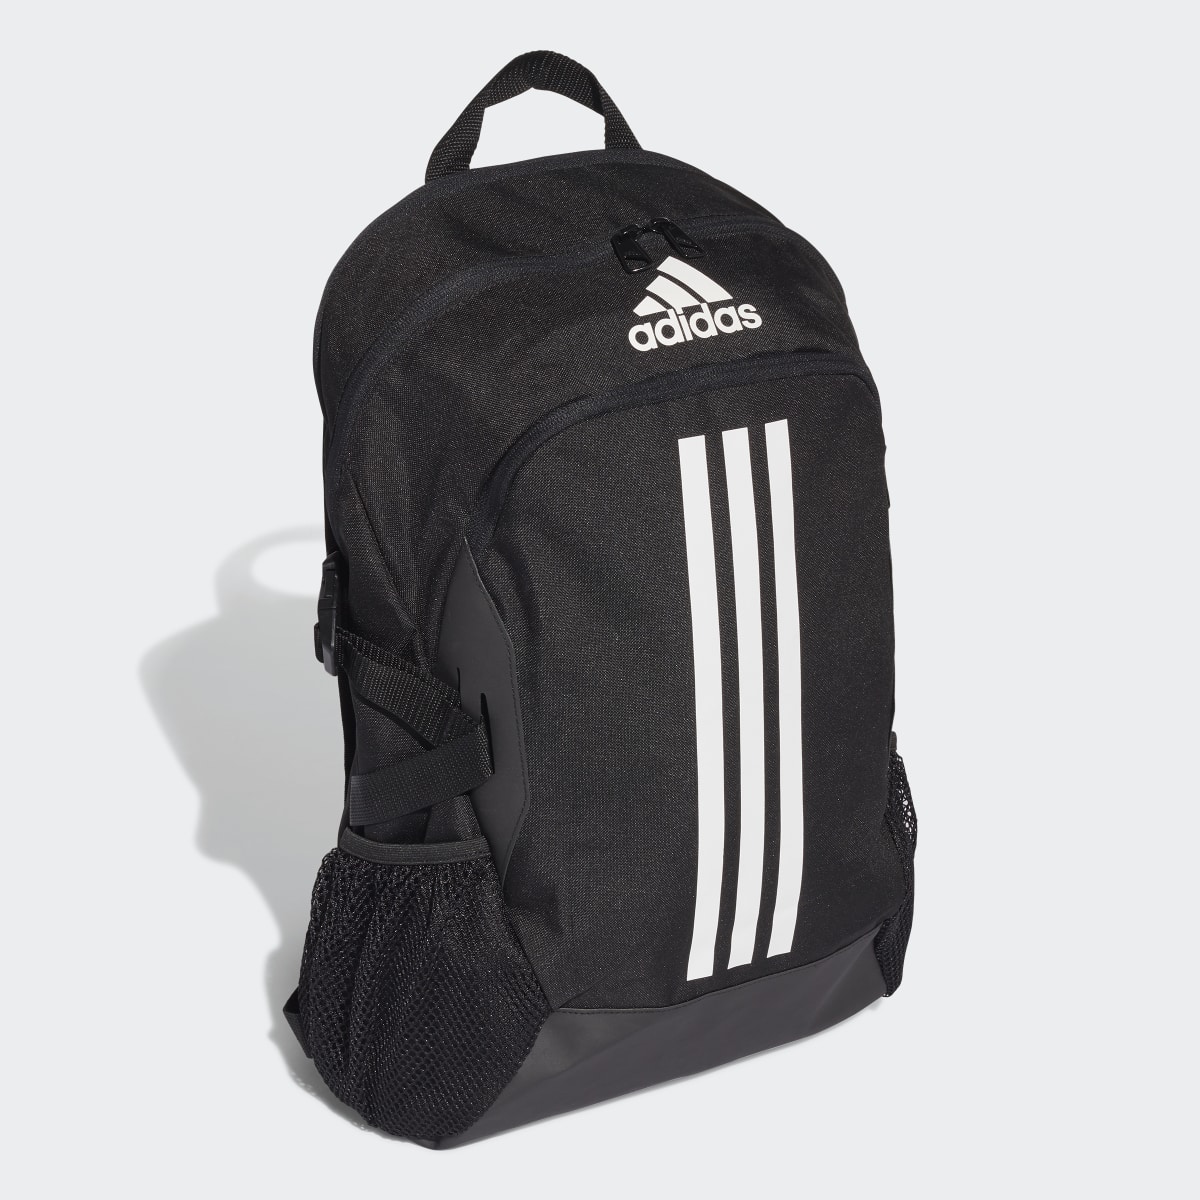 Adidas Power 5 Backpack. 4